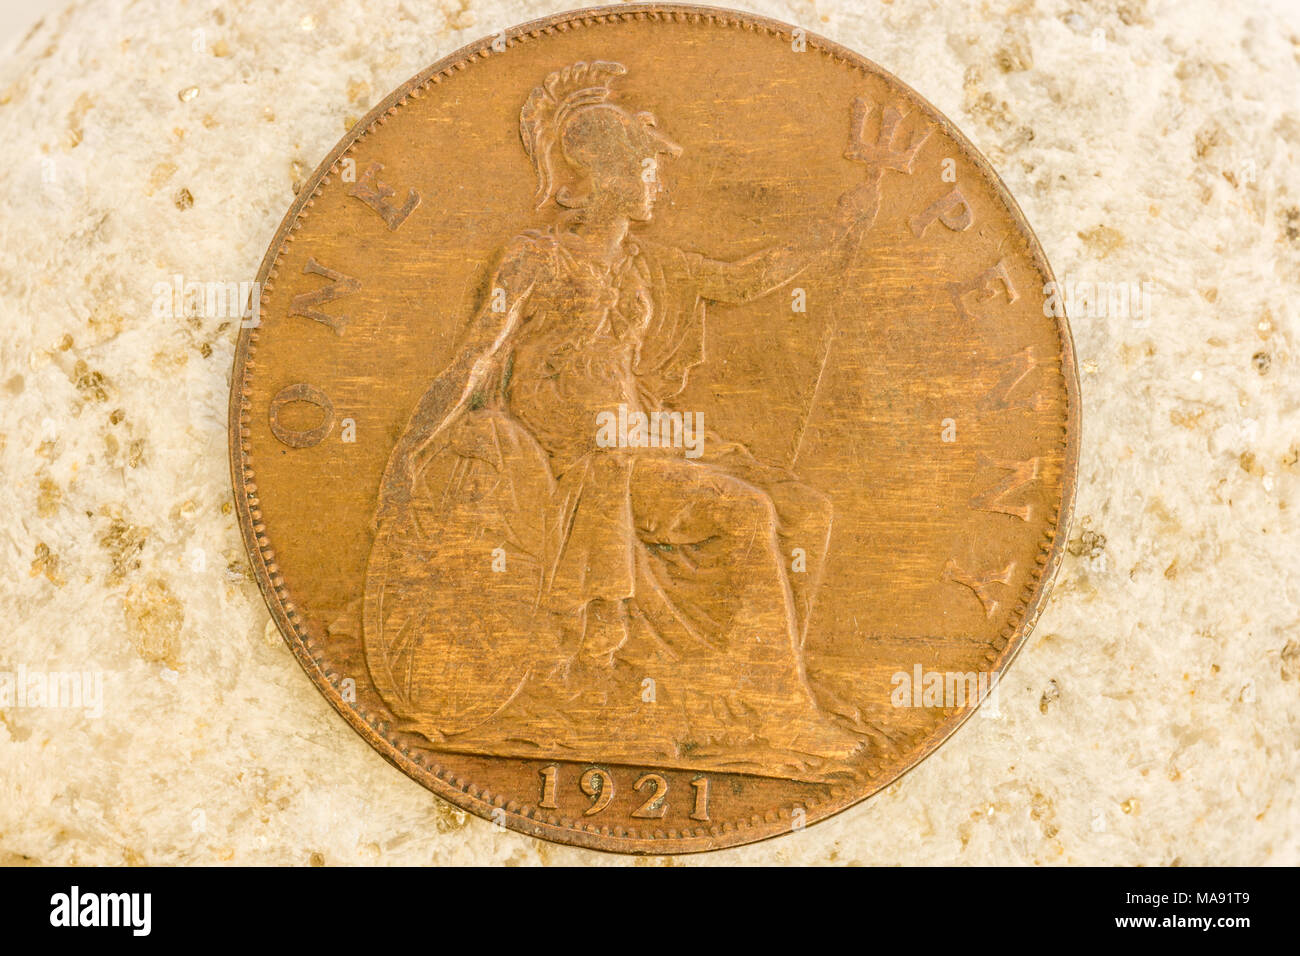 Close up view of aged vintage coin showing fine detail on coin engravings Stock Photo